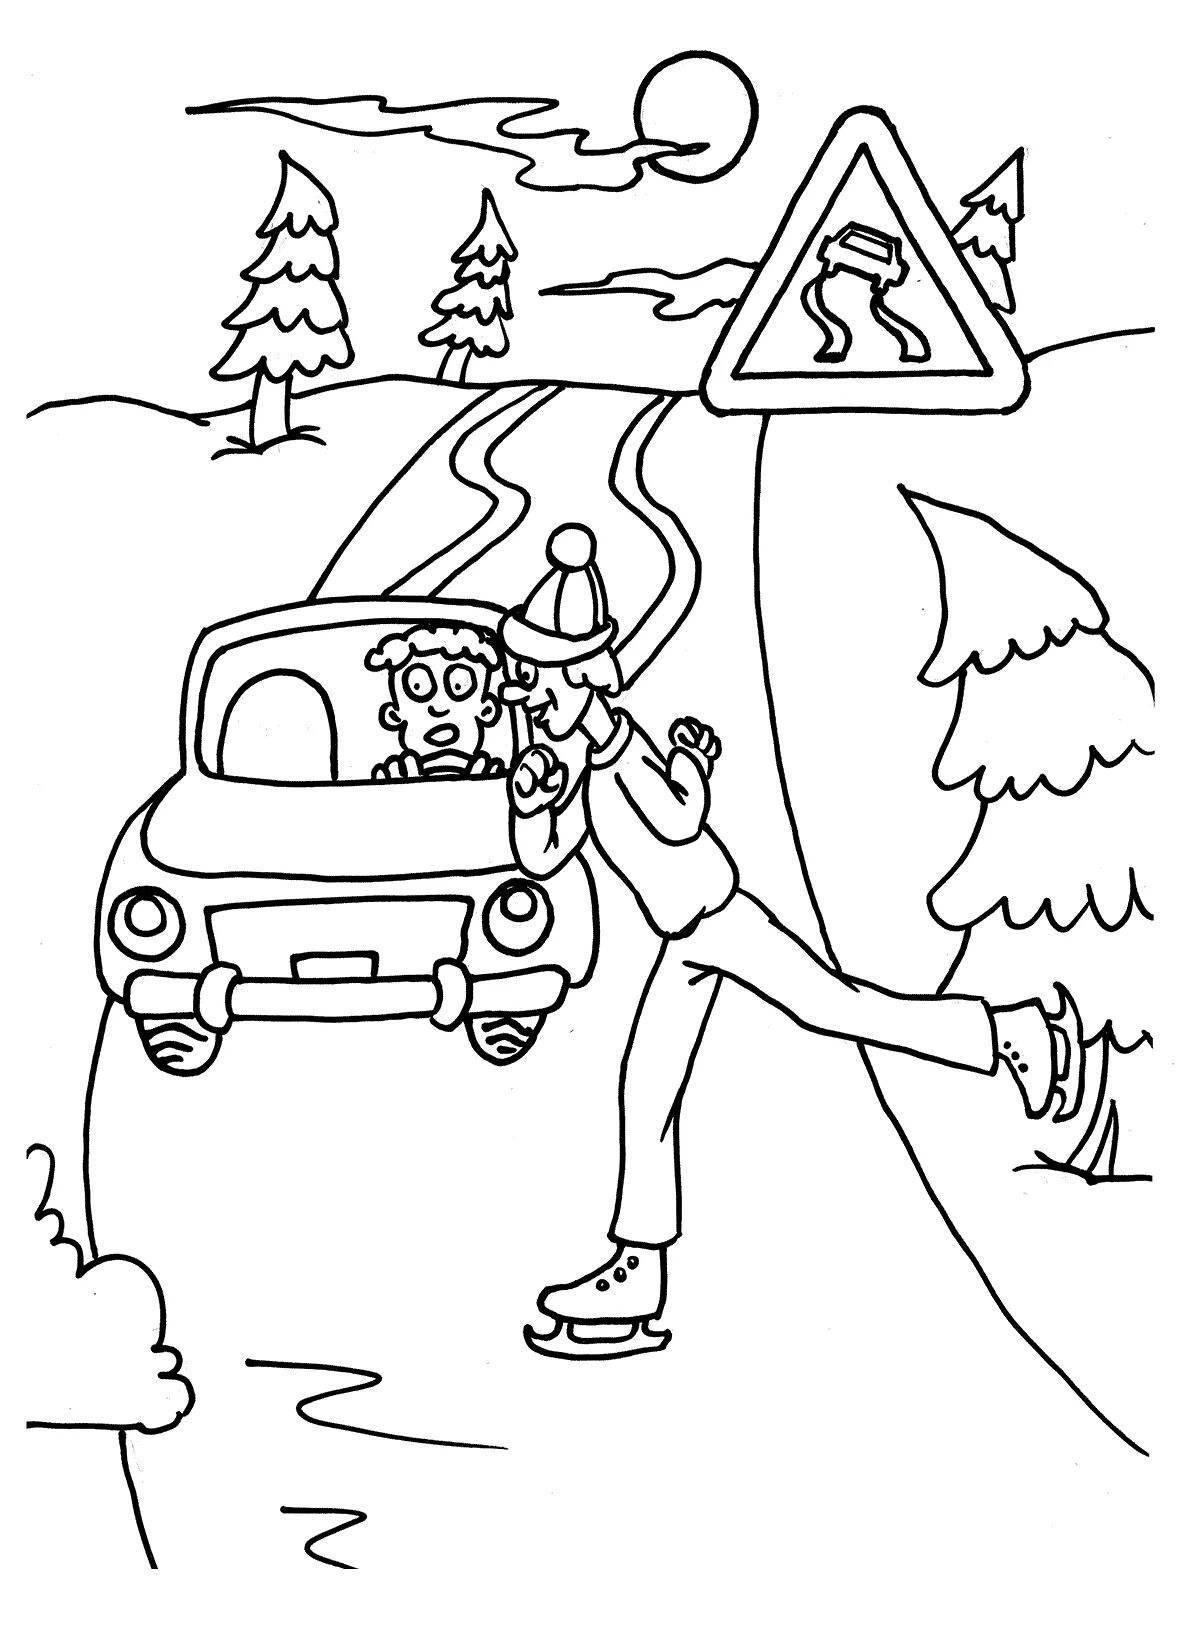 Lively caution ice coloring page